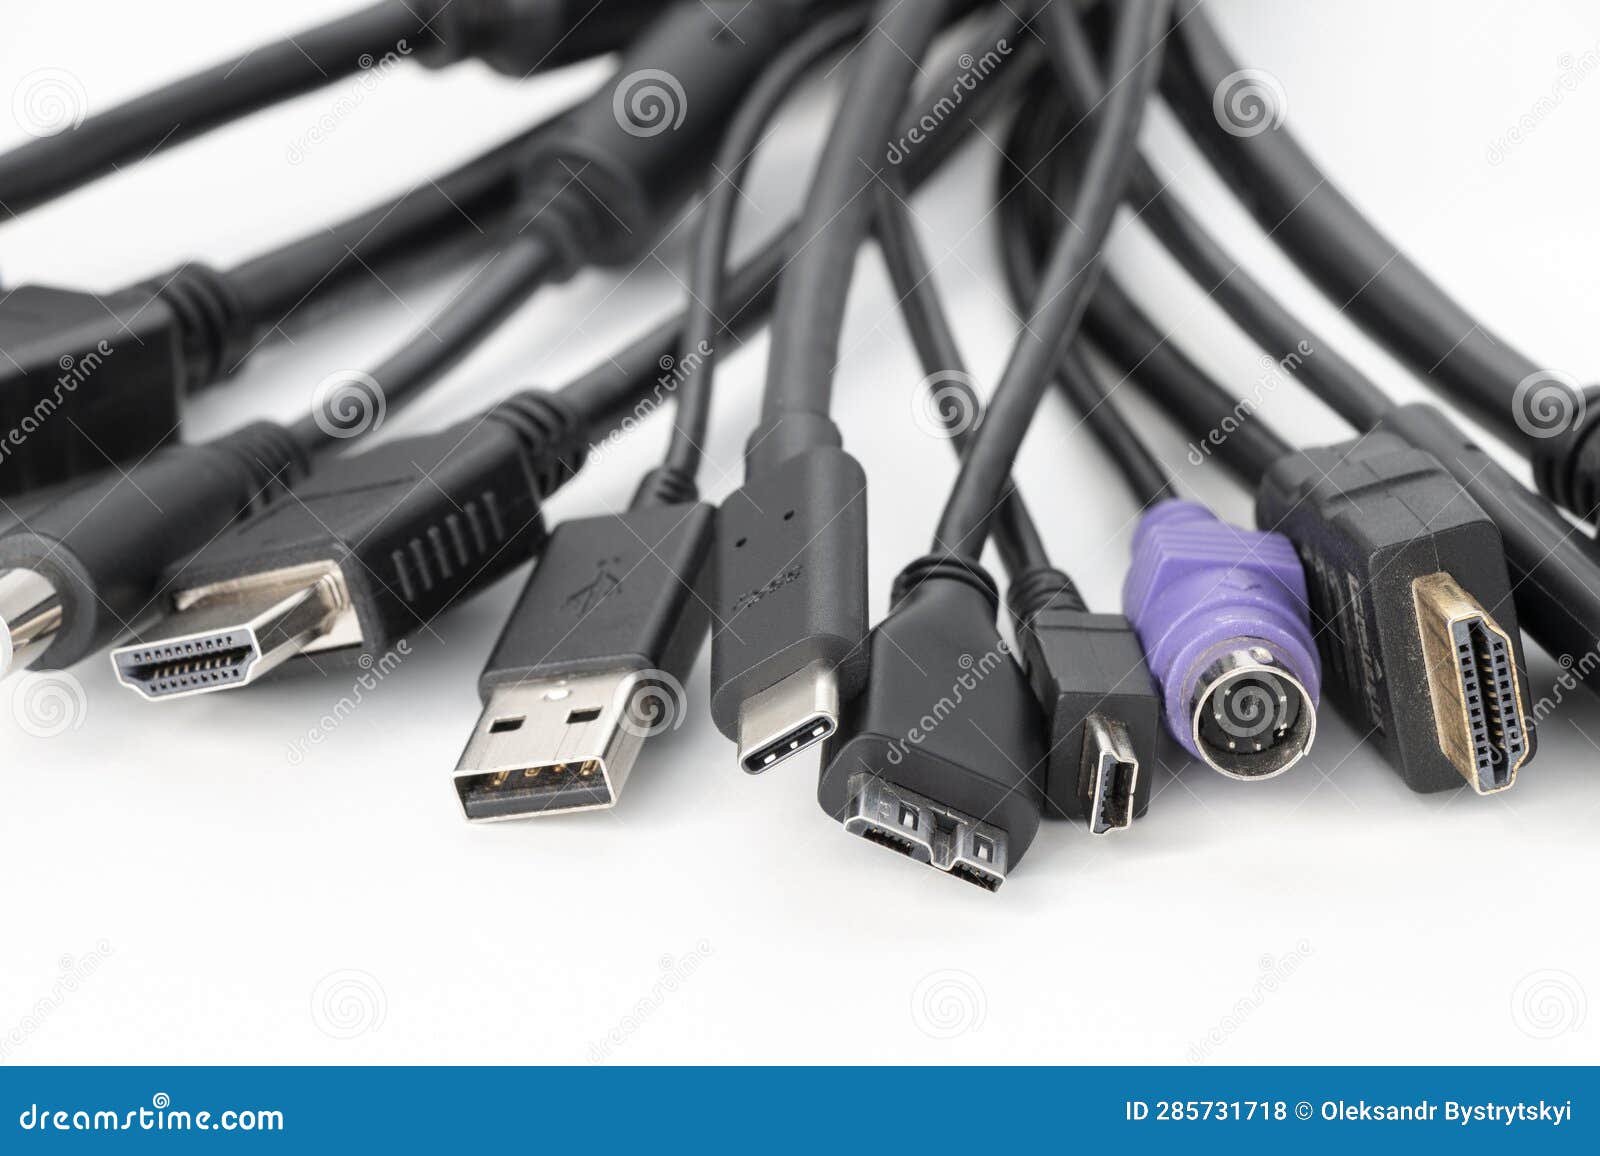 Displayport Royalty-Free Images, Stock Photos & Pictures